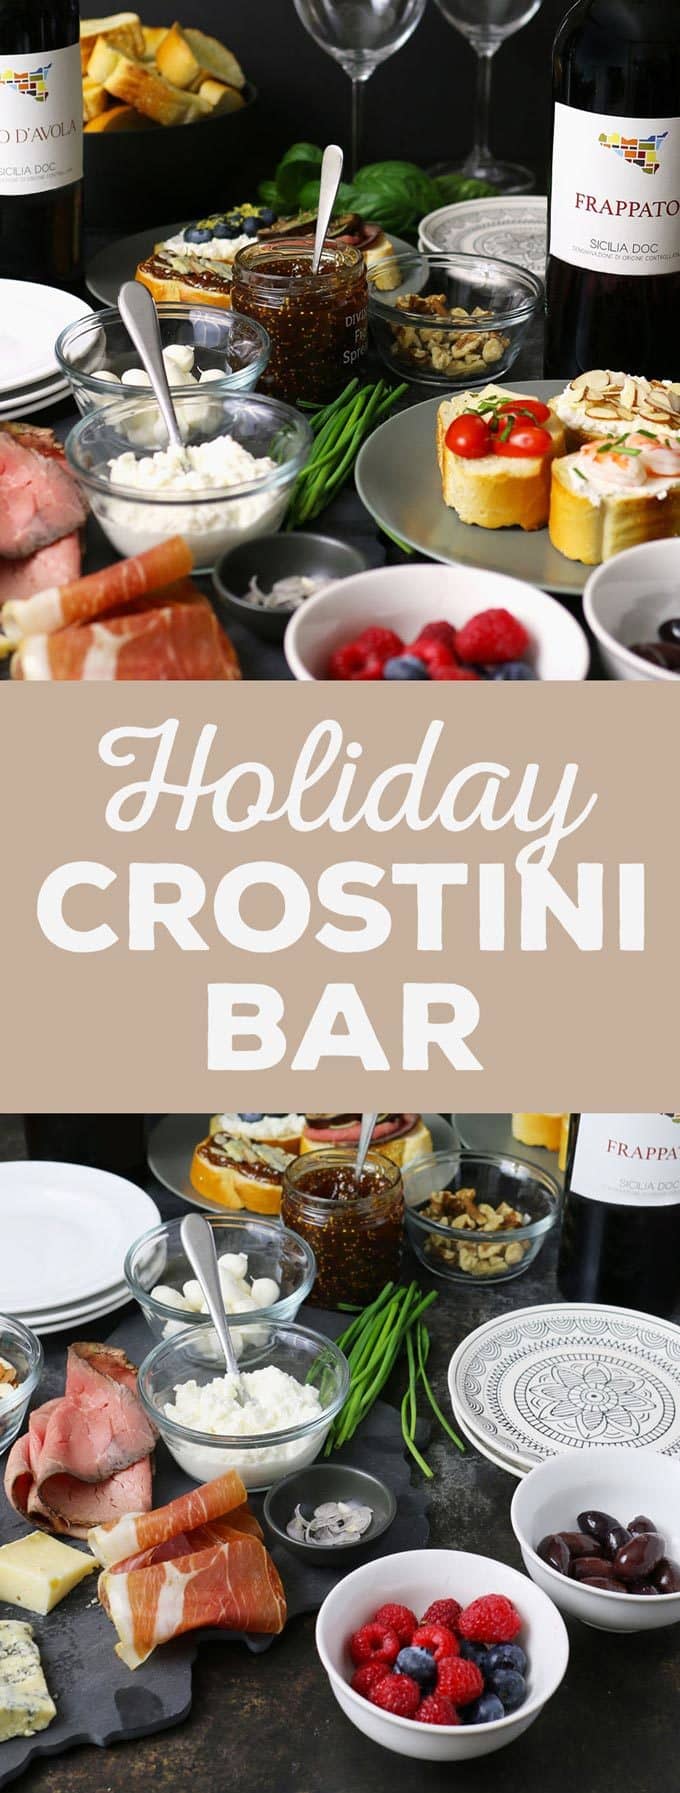 Include a holiday crostini bar at all of your holiday parties this year! These 12 3-ingredient crostini recipes are easy to make and pair perfectly with Nero d'Avola and Frappato wines. | honeyandbirch.com